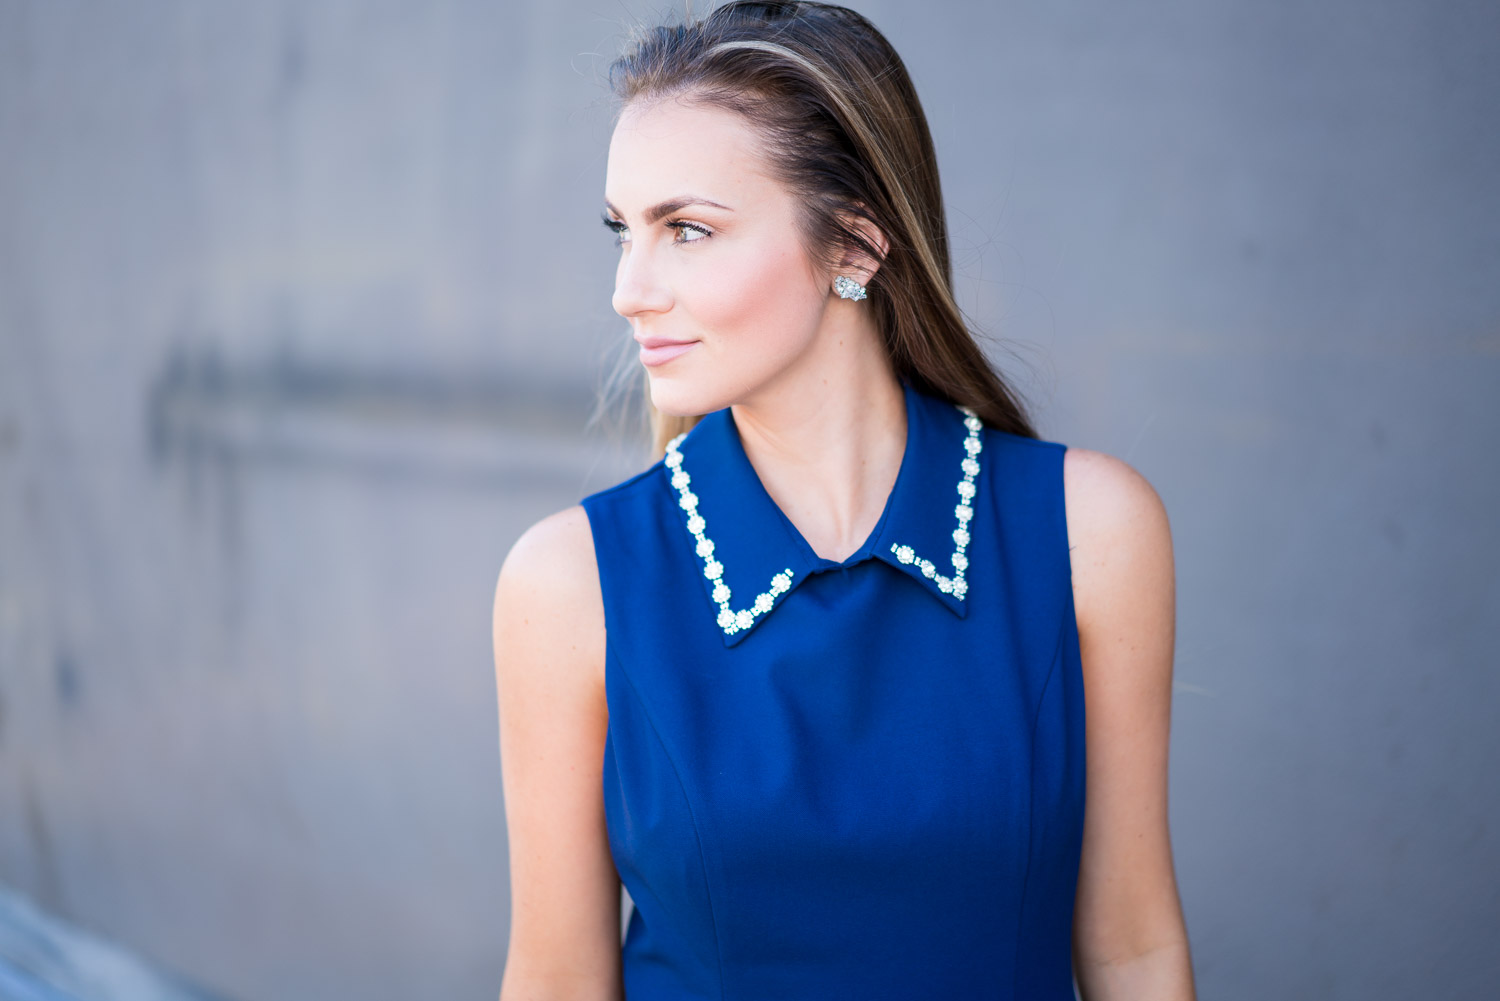 Navy Blue Dress embellished collar and nude heels